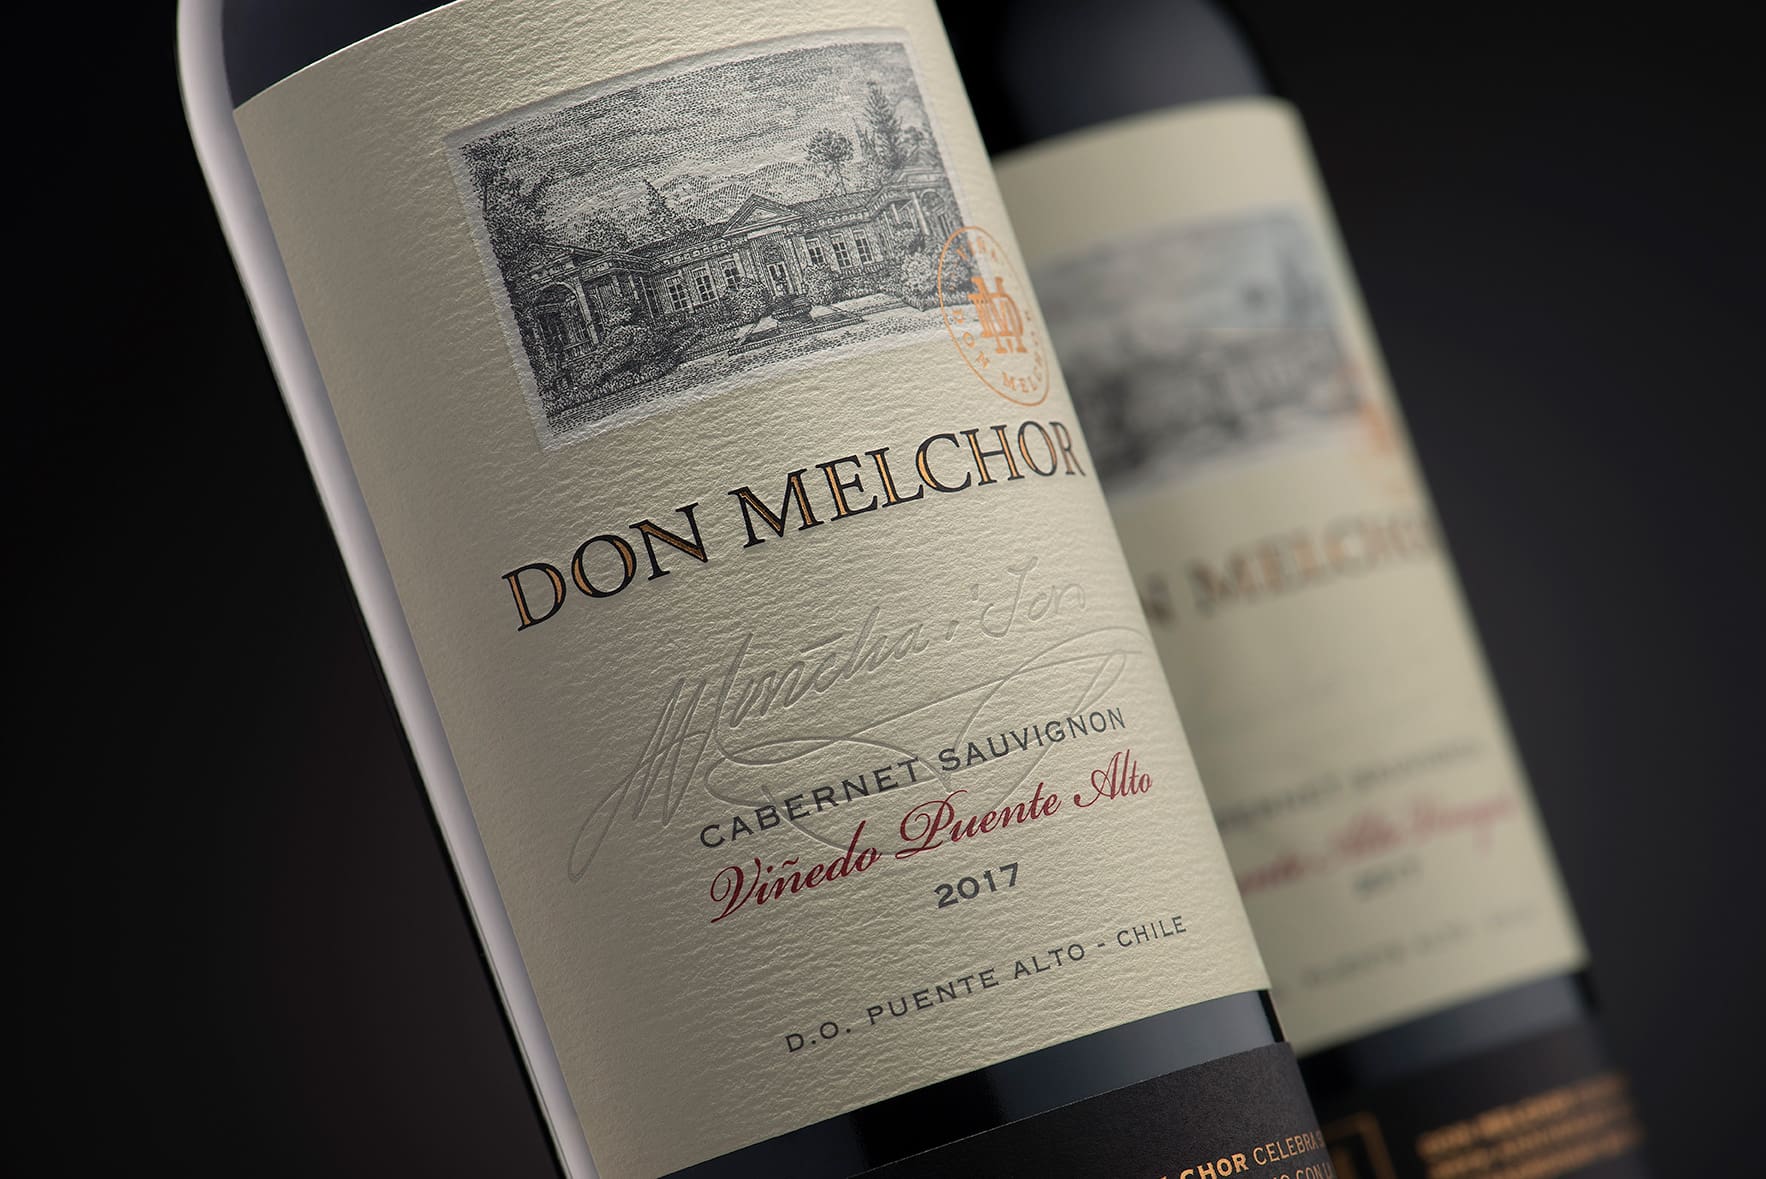 Outstanding 95 points for Don Melchor 2017